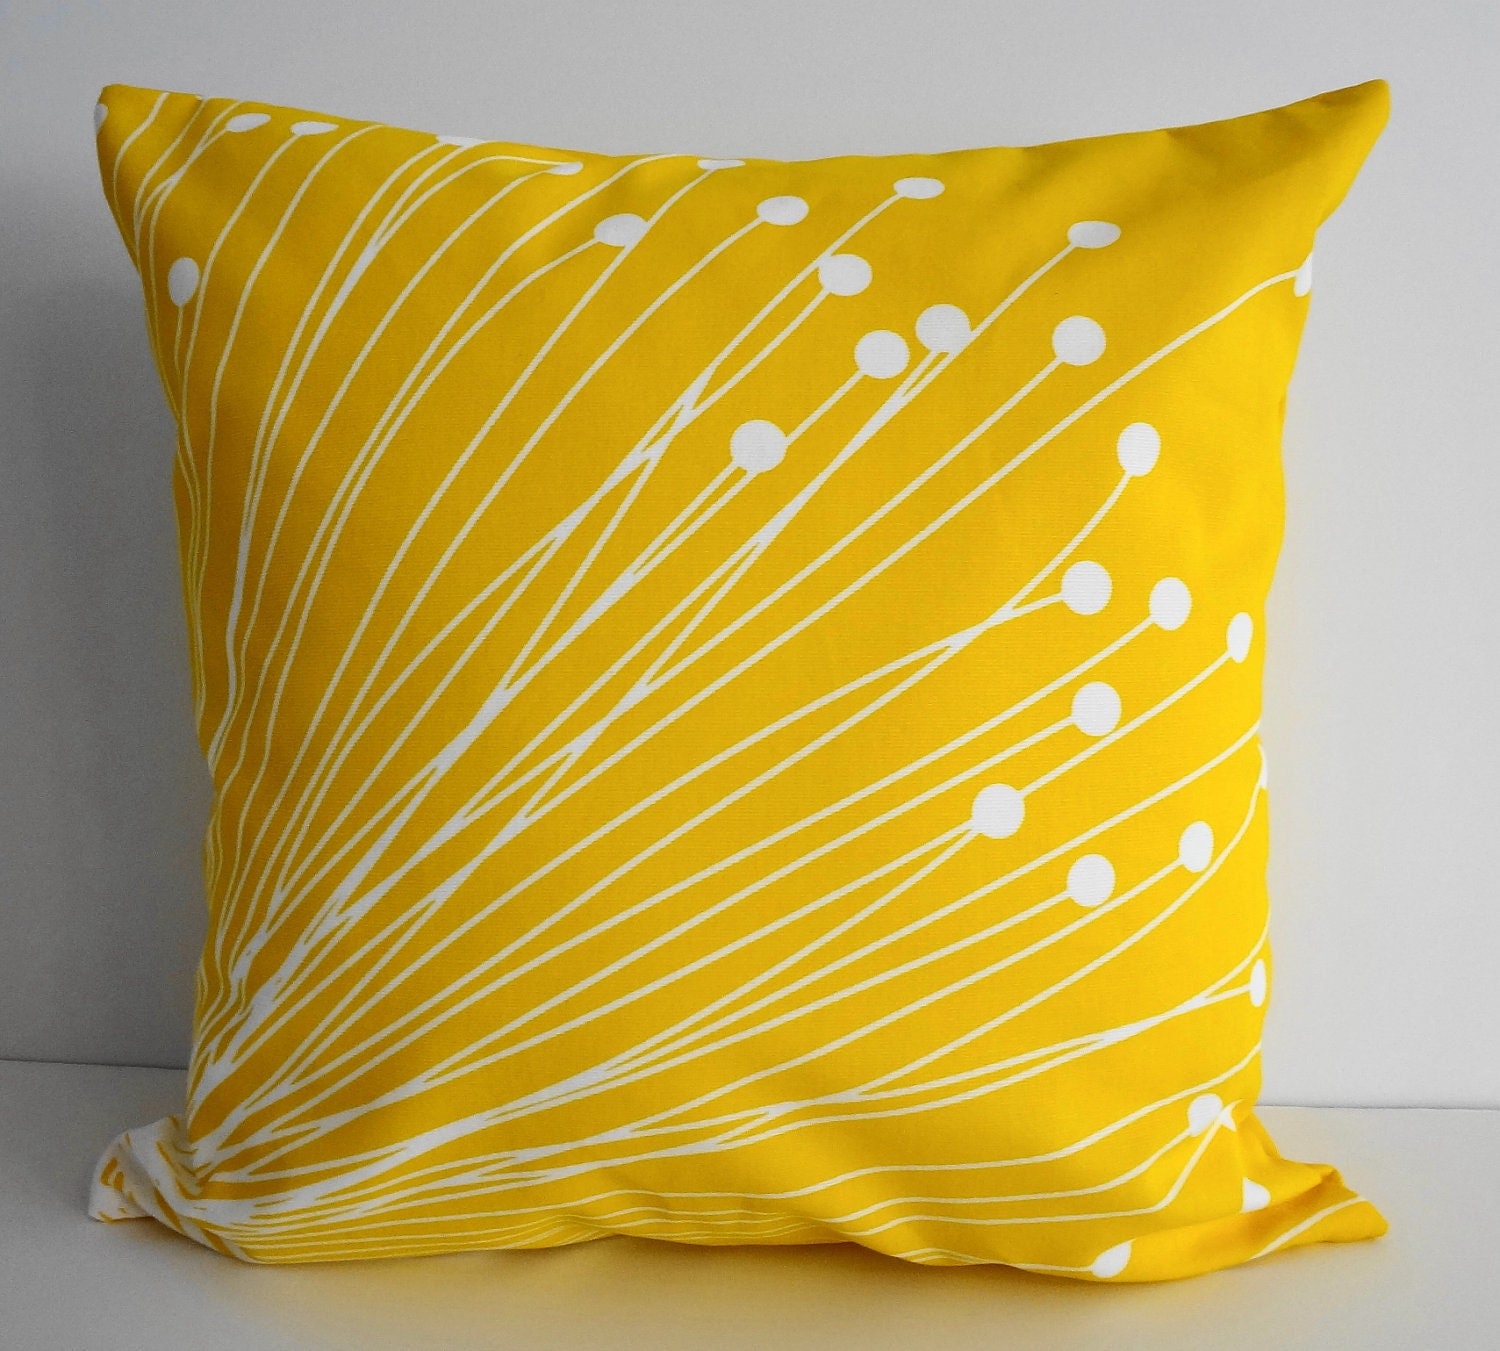 Yellow Starburst Pillow Covers Decorative Throw by pillows4fun